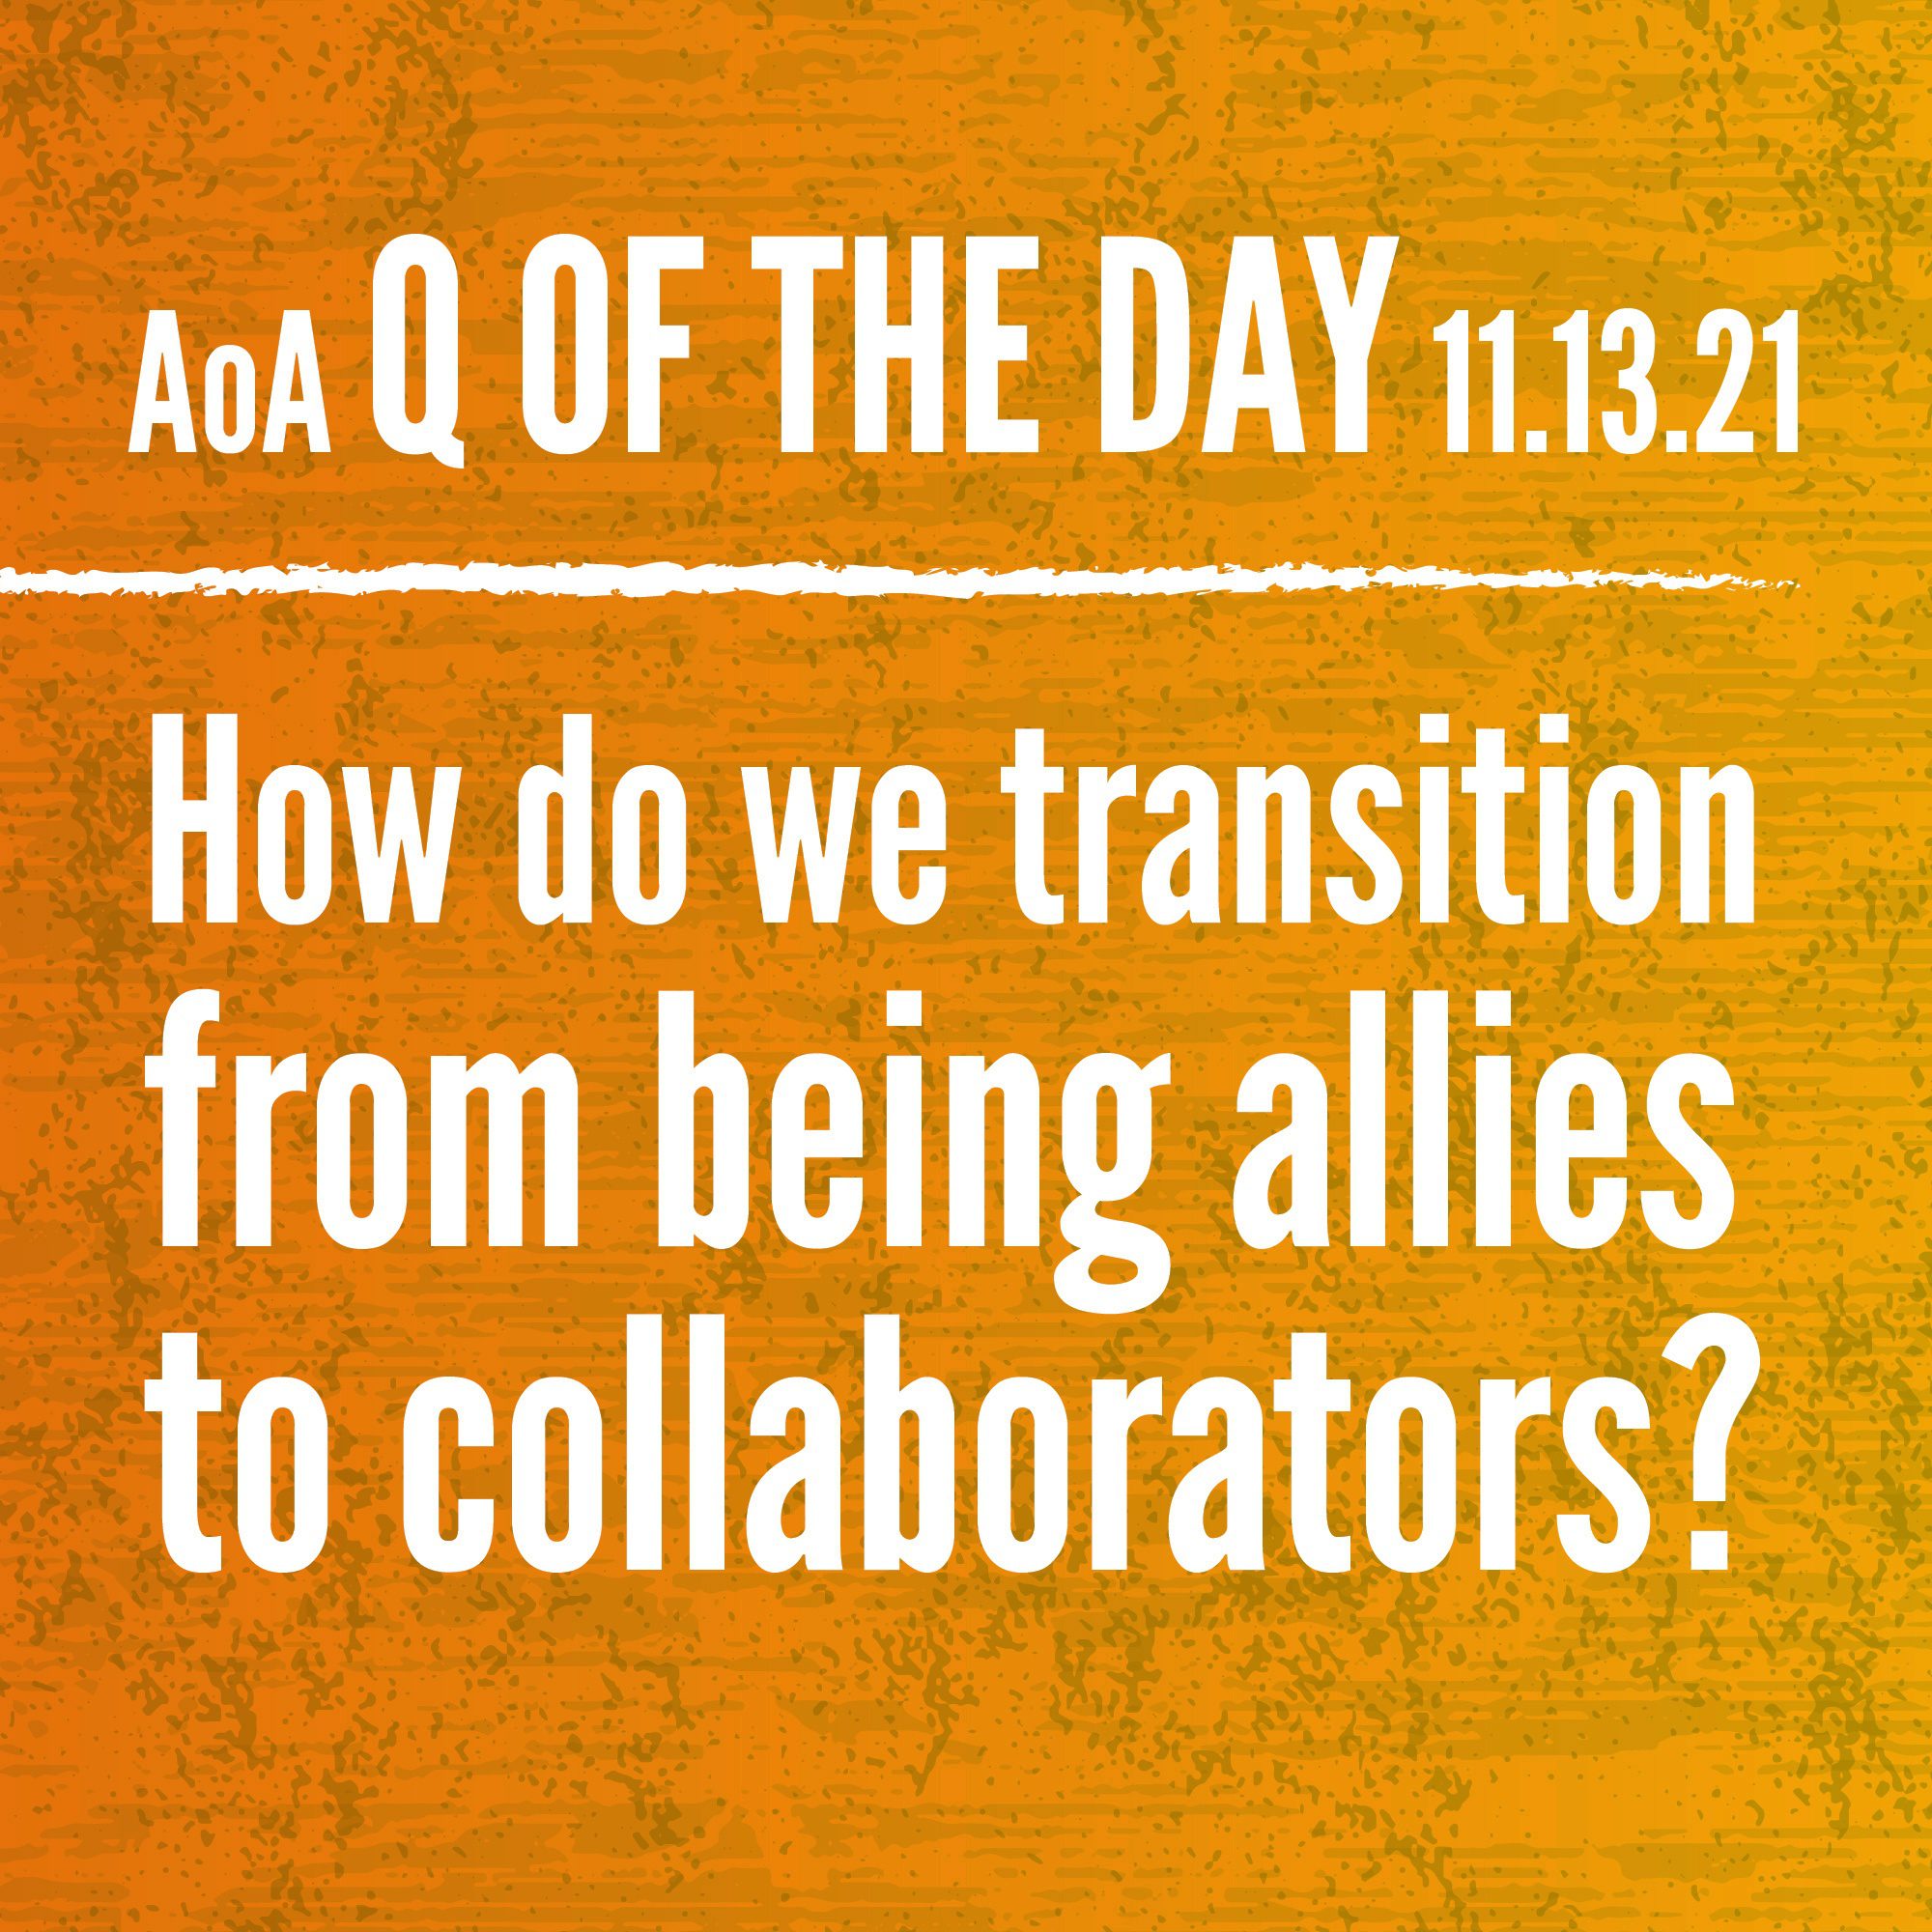 AoA Q of the Day November 13, 2021: How do we transition from being allies to collaborators?